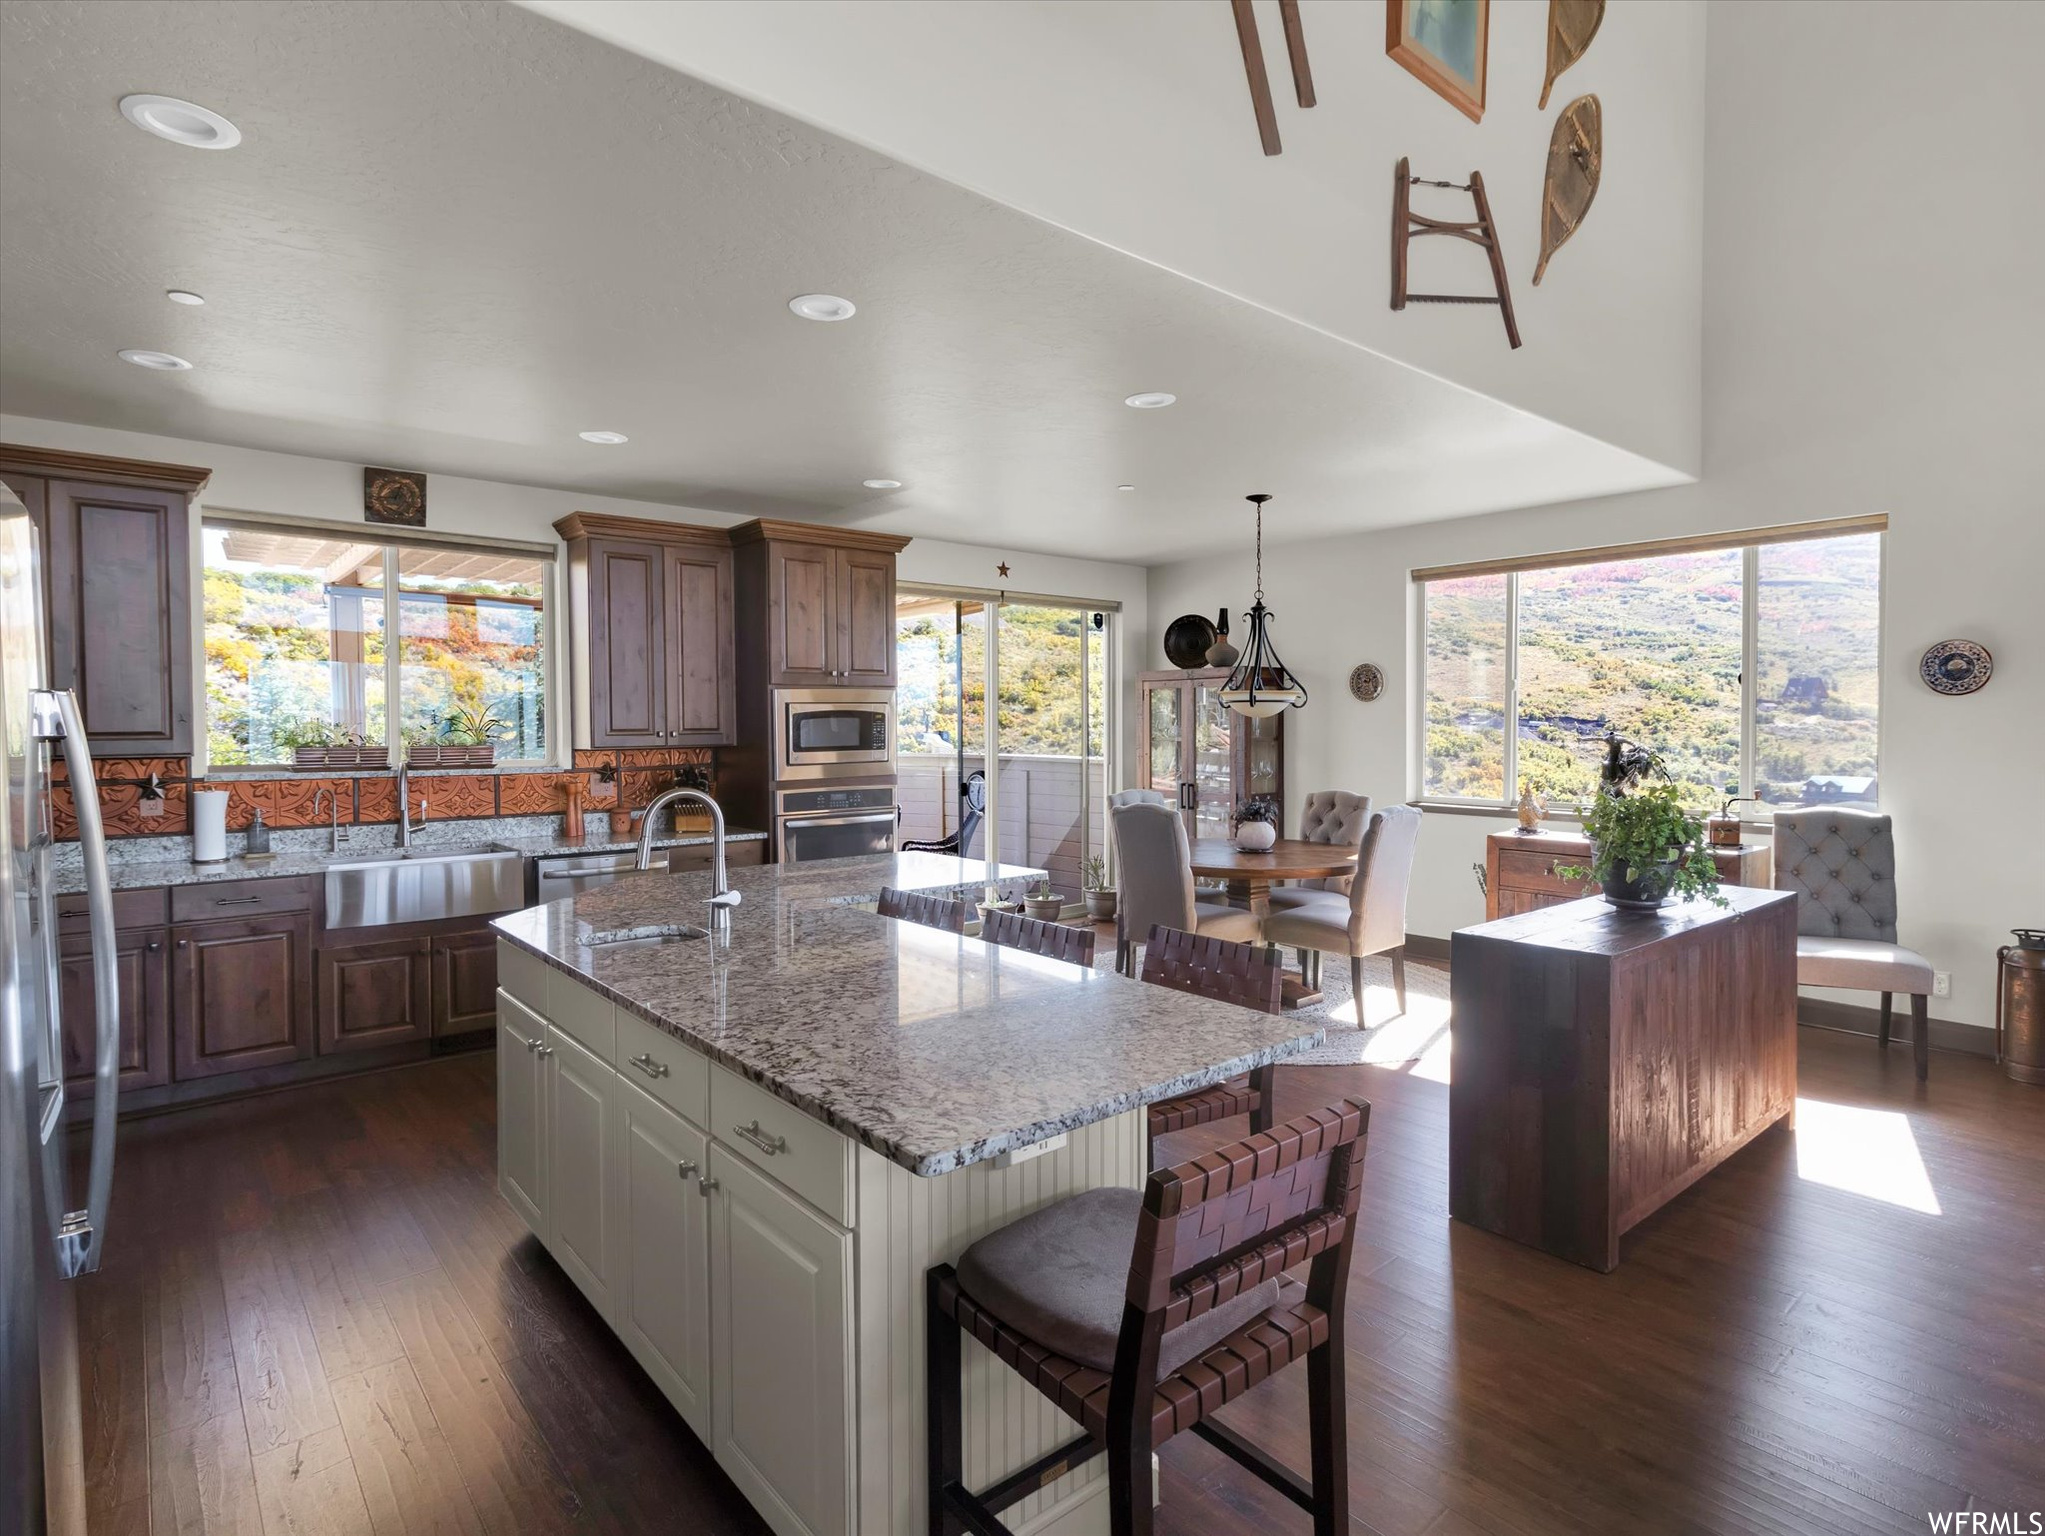 Kitchen featuring light stone countertops, a kitchen island with sink, dark hardwood floors, hanging light fixtures, and sink